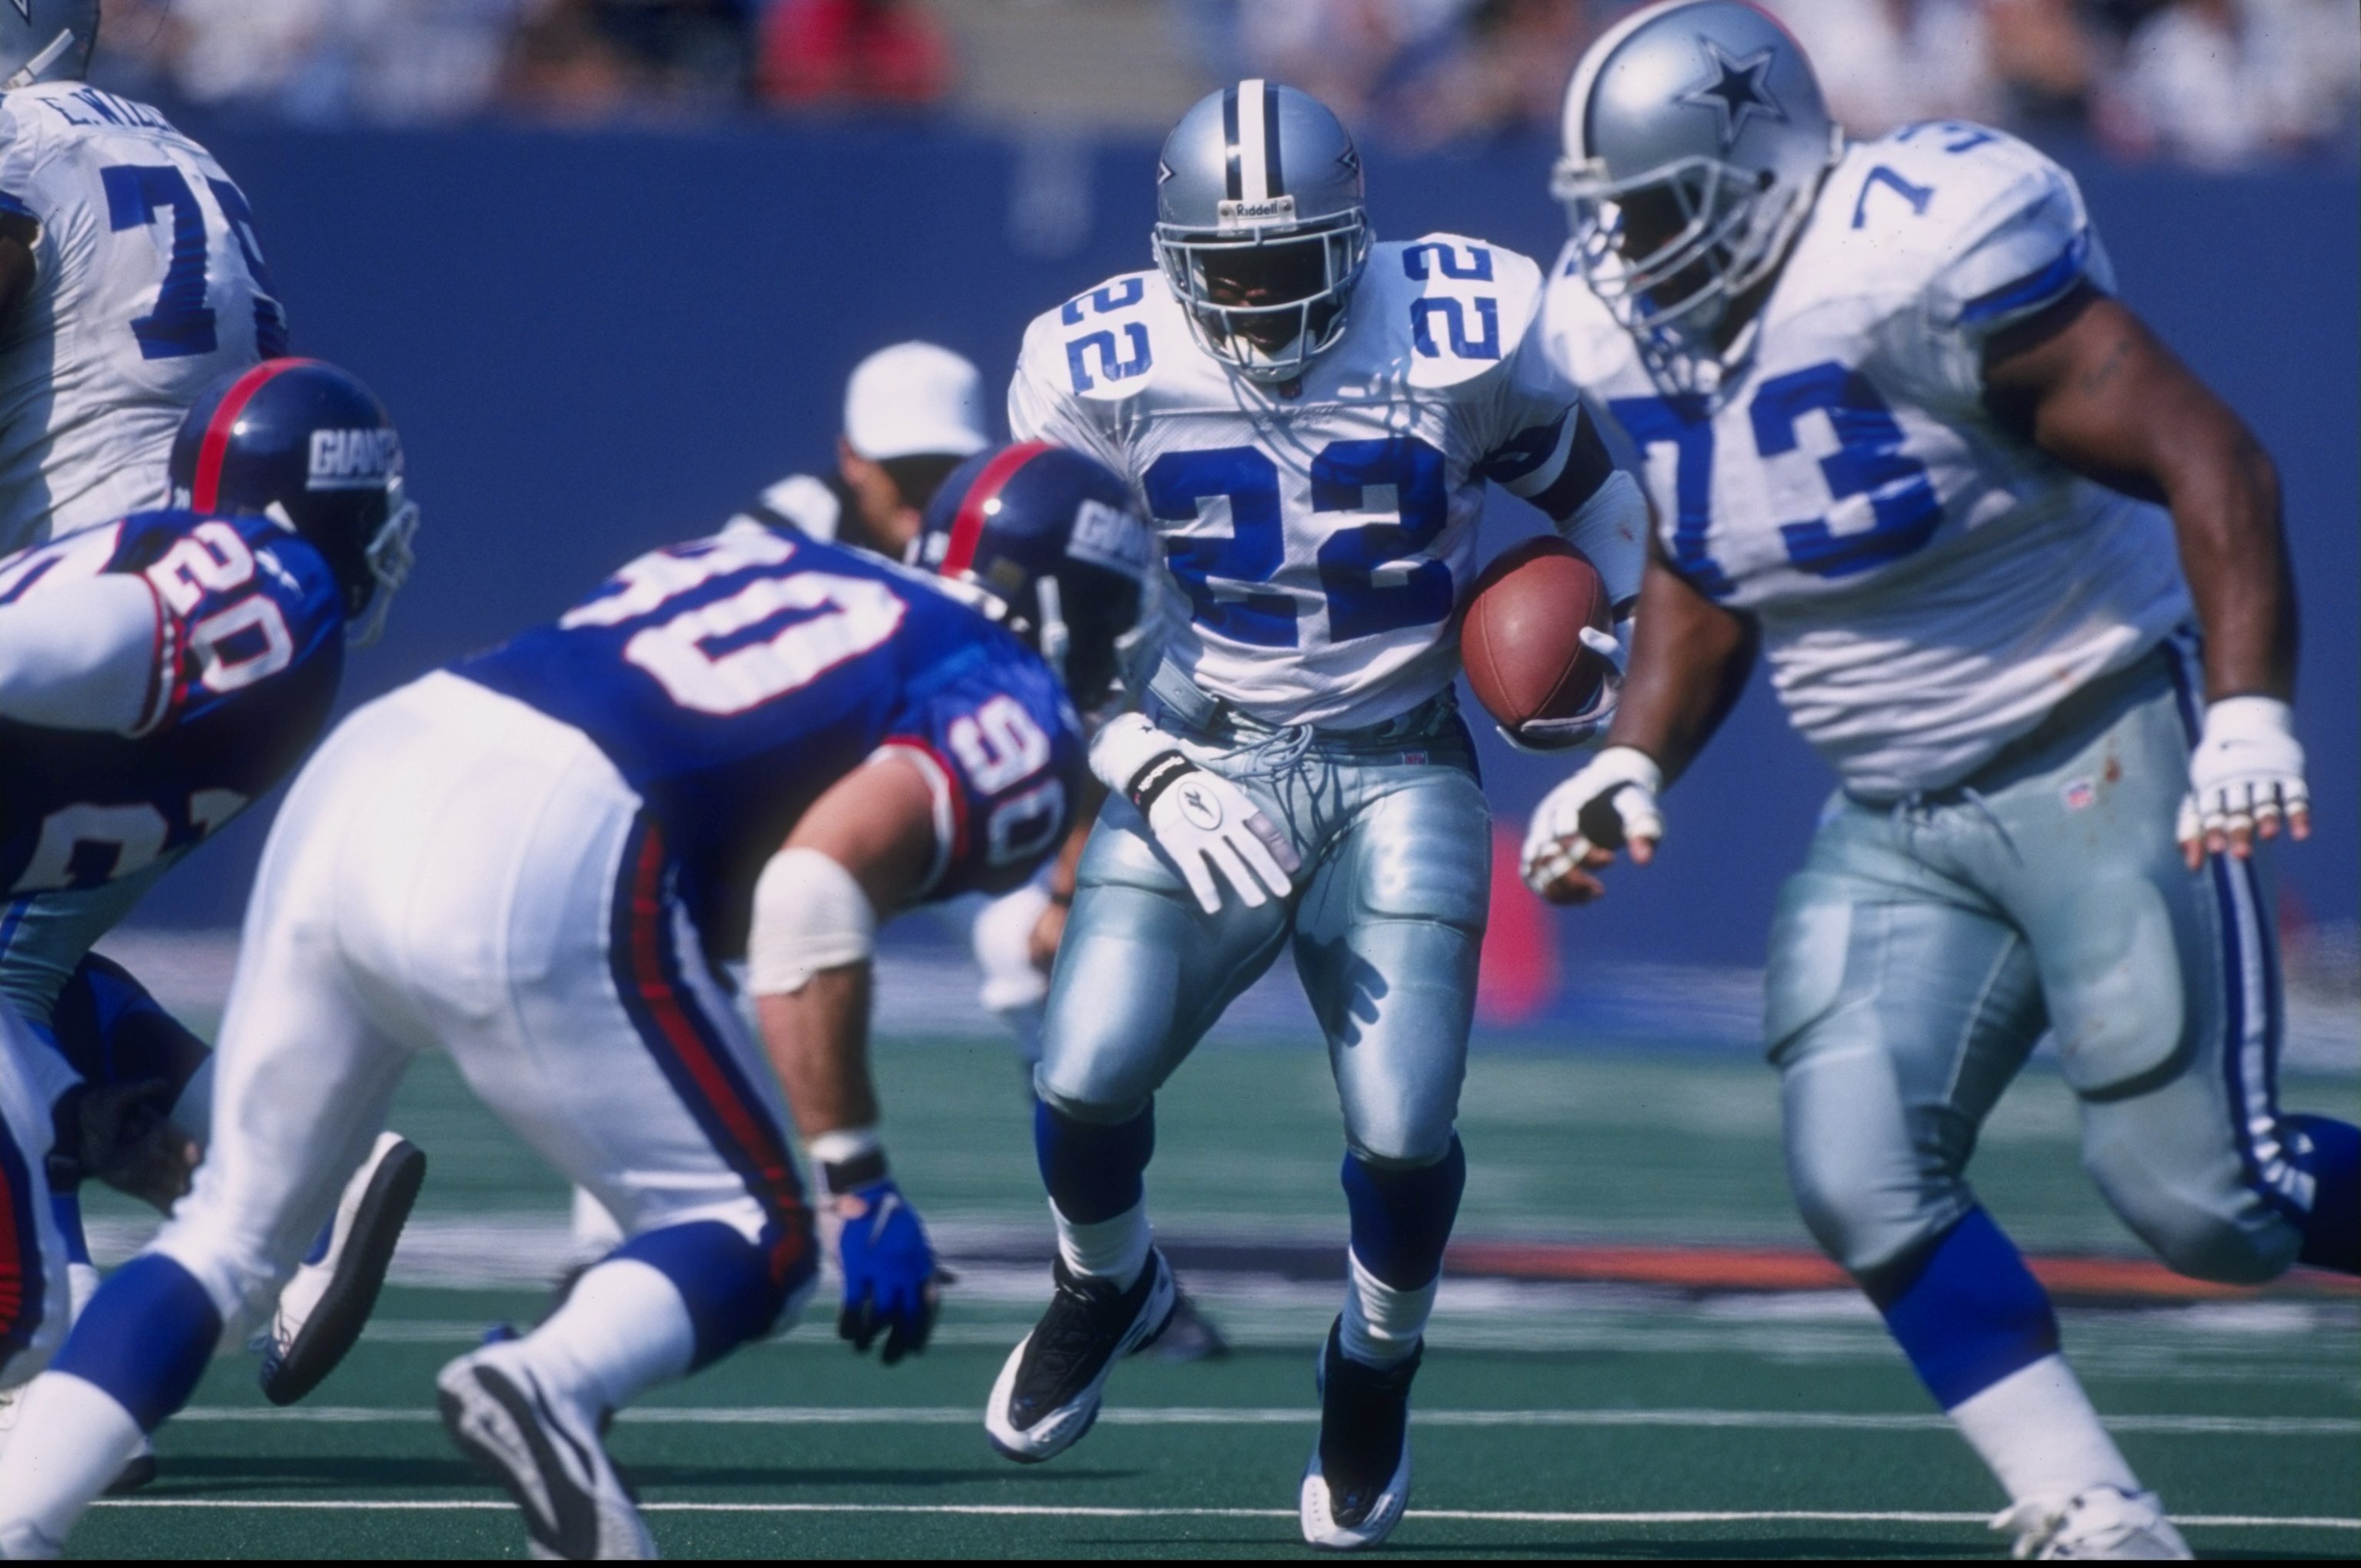 4 Oct 1997:  Emmitt Smith #22 of the Dallas Cowboys runs with the ball  as teammate Larry Allen #73 sets up to block Corey Widmer #90 of the New York Giants during a game at the Meadowlands in East Rutherford, New Jersey. The Giants defeated the Cowboys 2